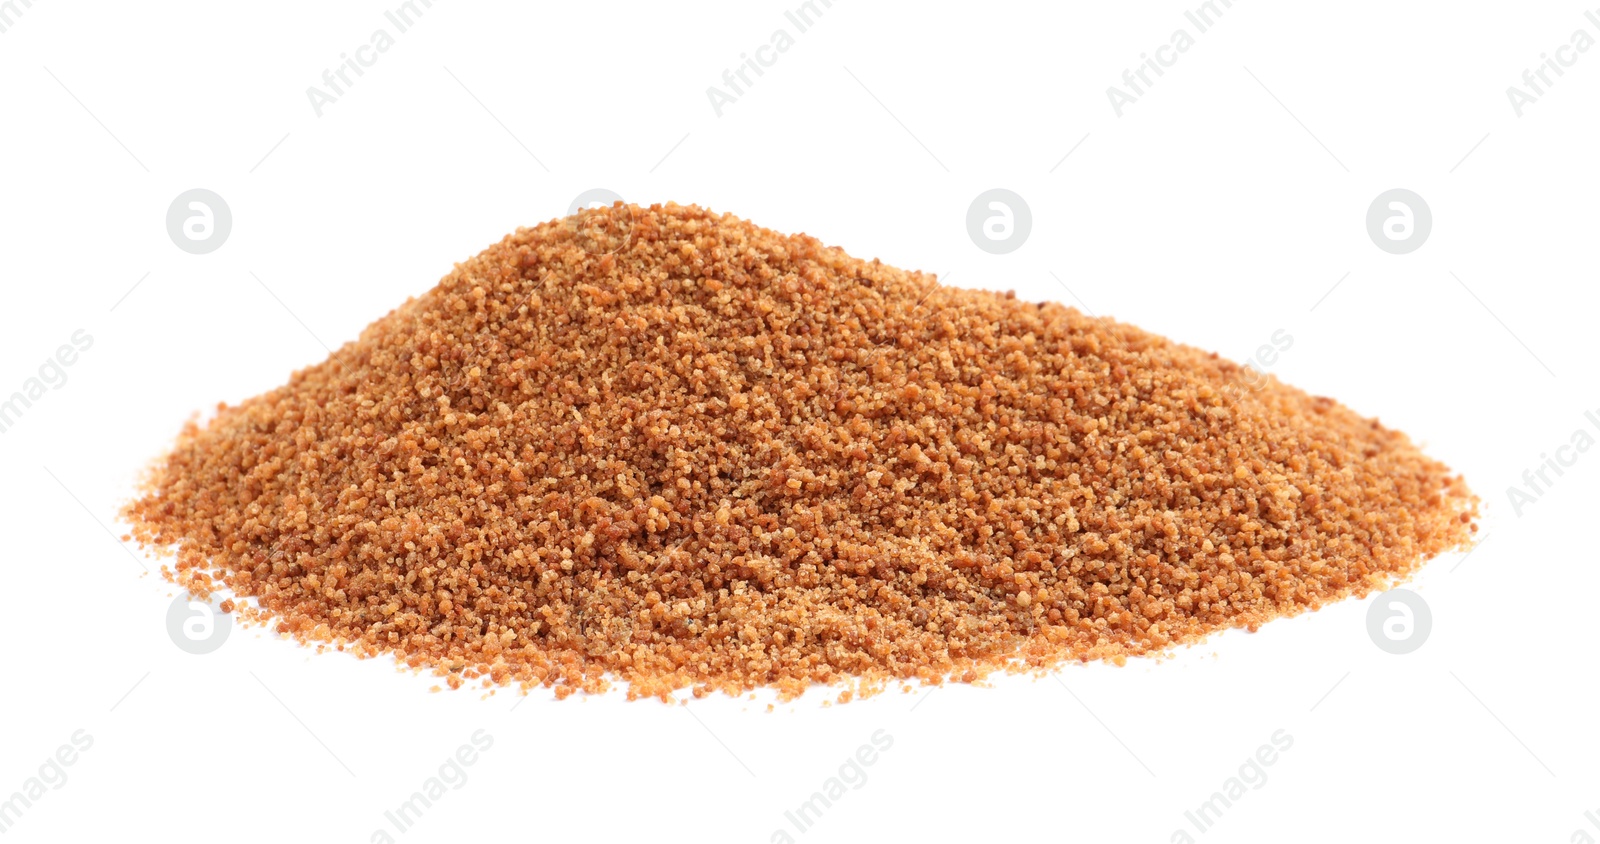 Photo of Pile of natural coconut sugar on white background